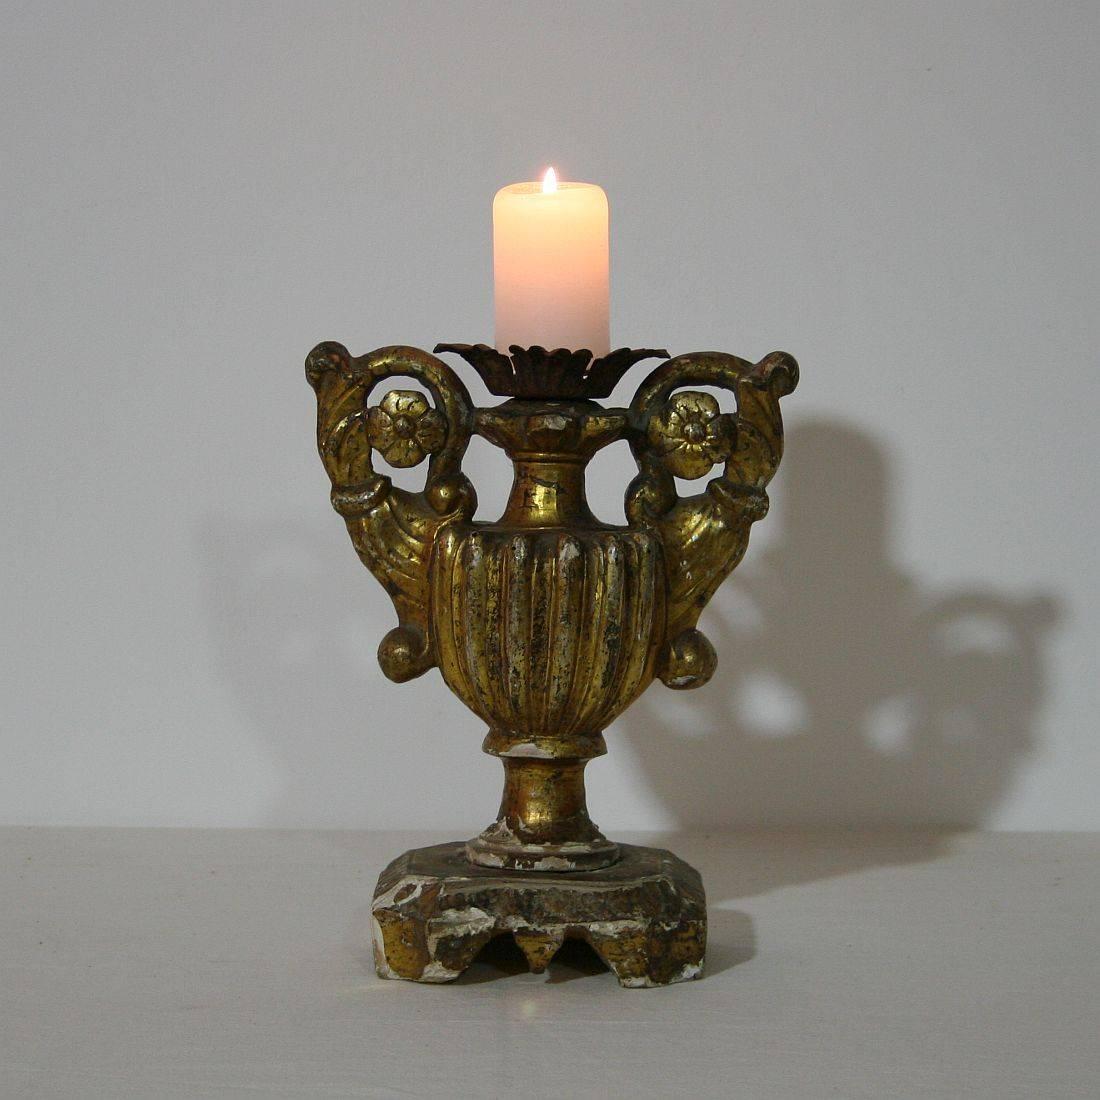 Unique Baroque giltwood candleholder, Italy, circa 1750. Weathered and some small losses on the gilding.